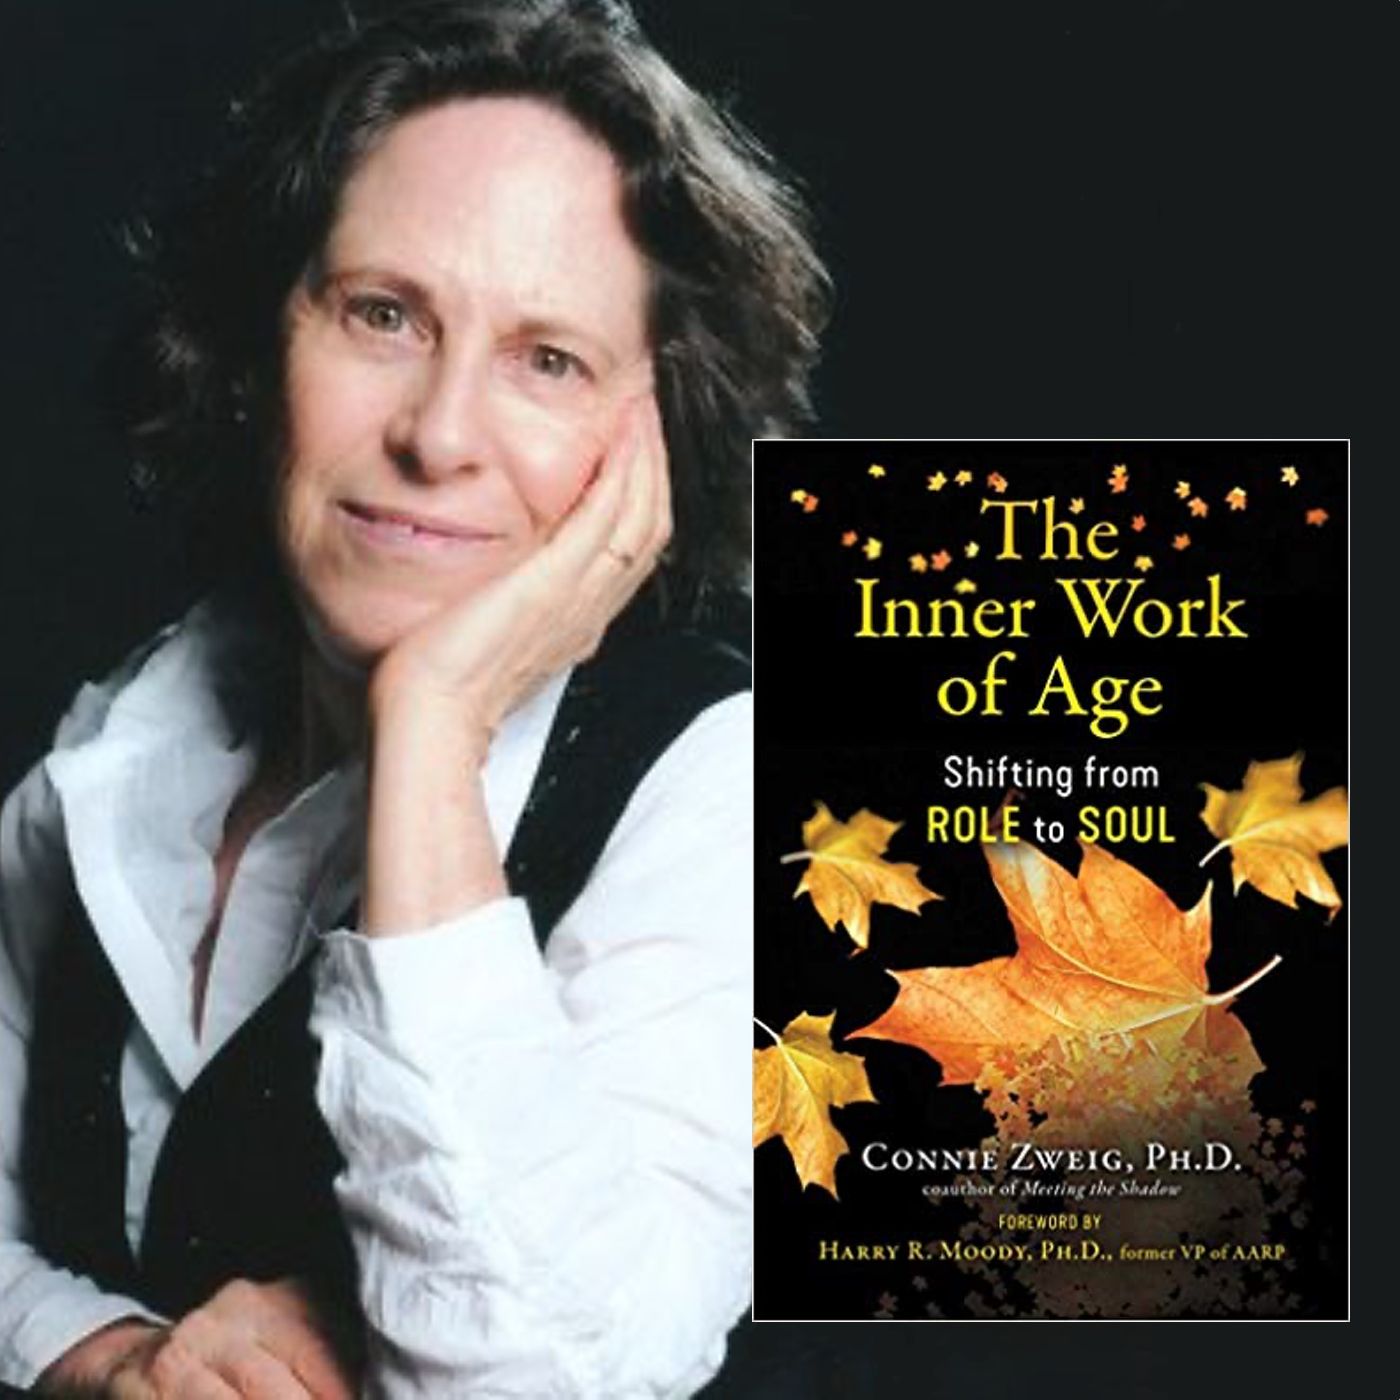 The Inner Work of Age with Connie Zweig, Ph.D.